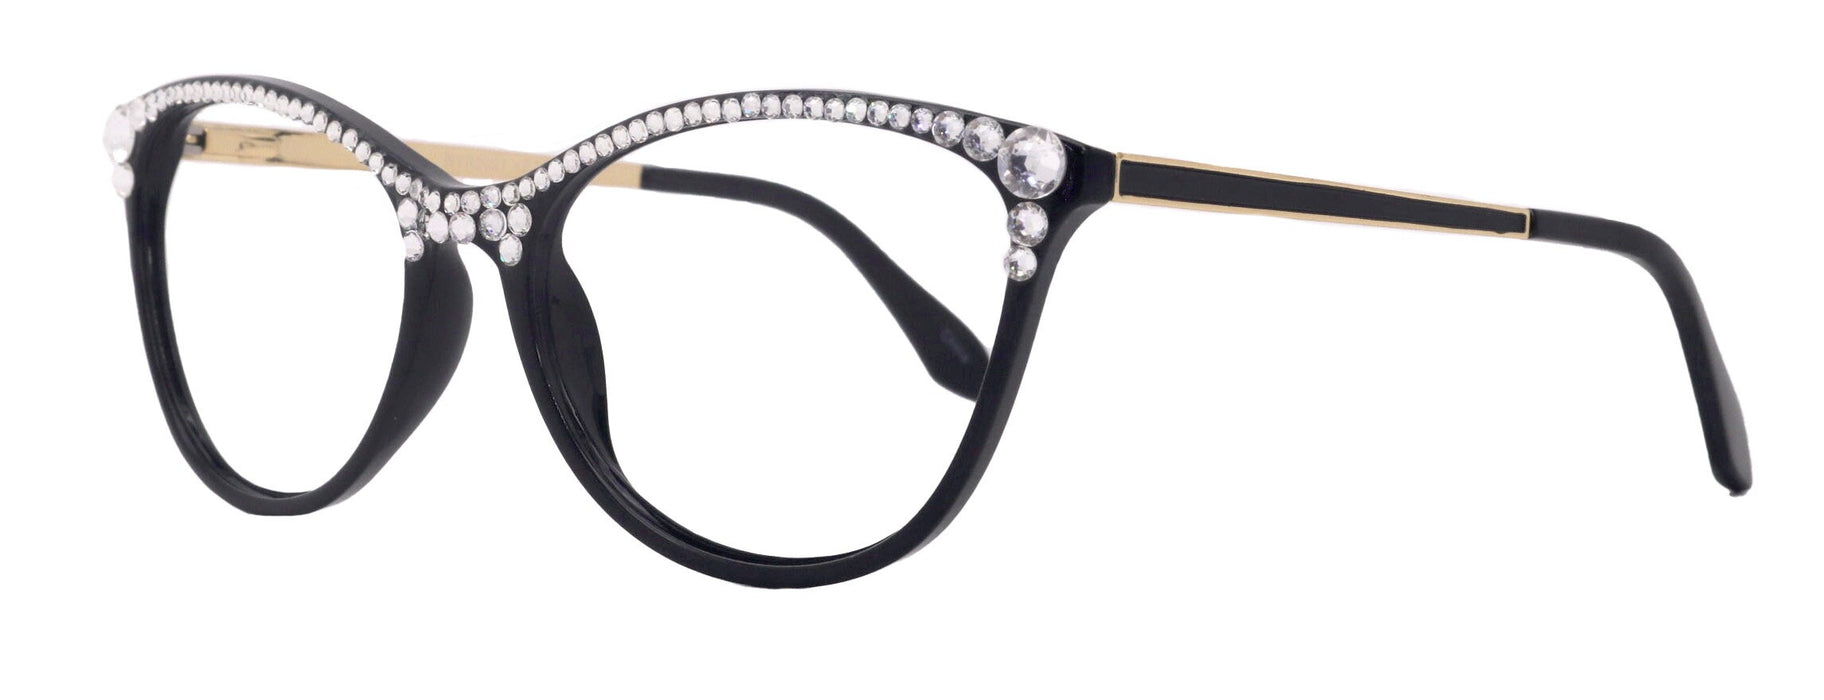 Cattitude Bling Reading Glasses 4 Women W Clear on Top Genuine European Crystals, Magnifying Cat Eye NY Fifth Avenue